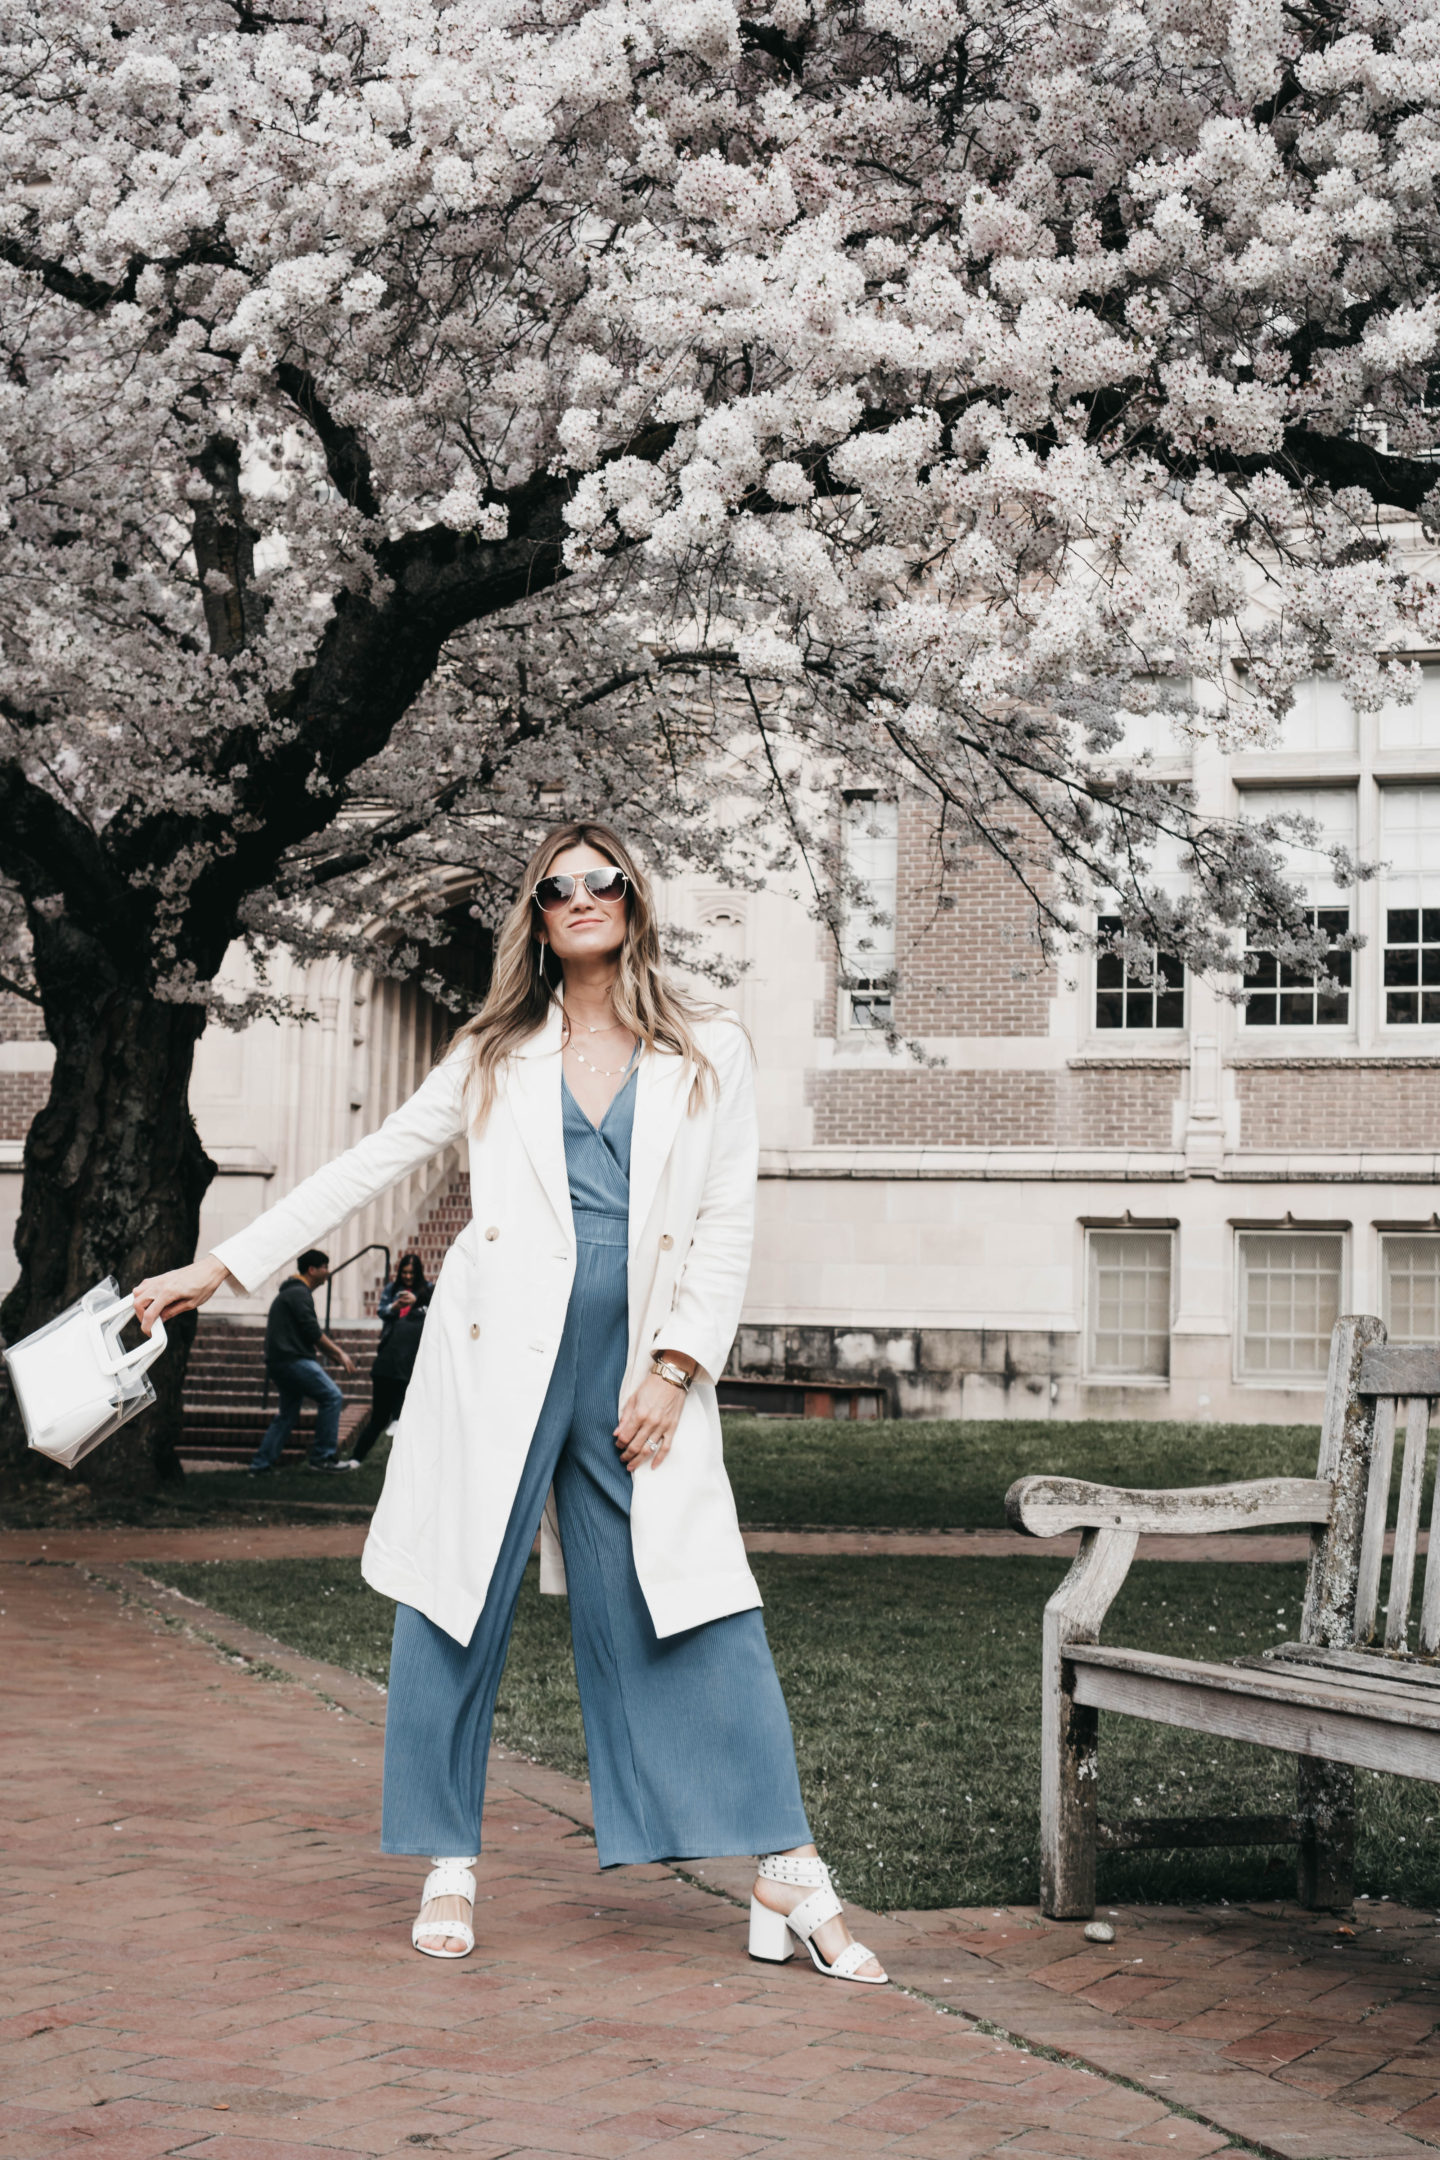 Seattle Blogger Cortney Bigelow of The Grey Edit - Spring Style - UW Quad - Cherry Blossoms - Blue Jumpsuit - Linen Jacket - Outfit